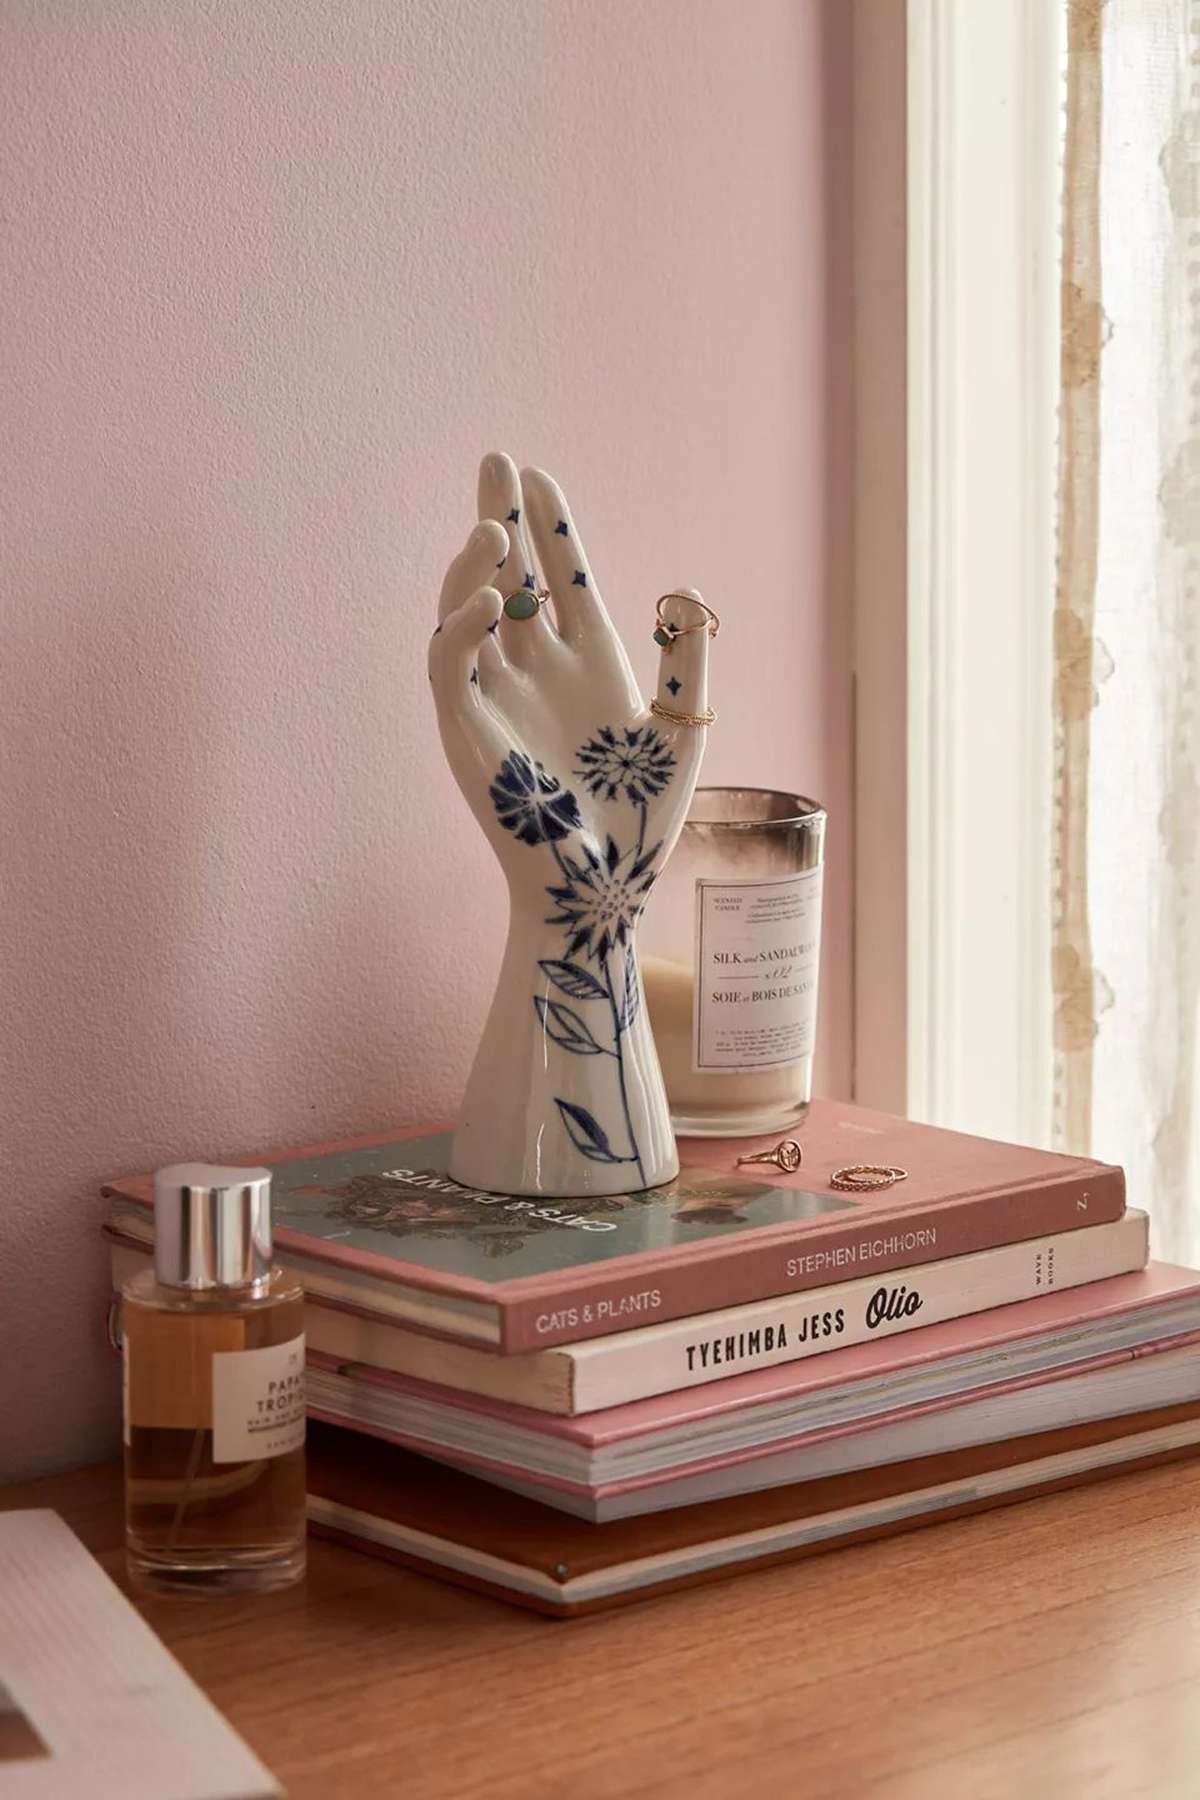 I Am Convinced Every Chic Adult Has One of These Ceramic Jewelry Holders